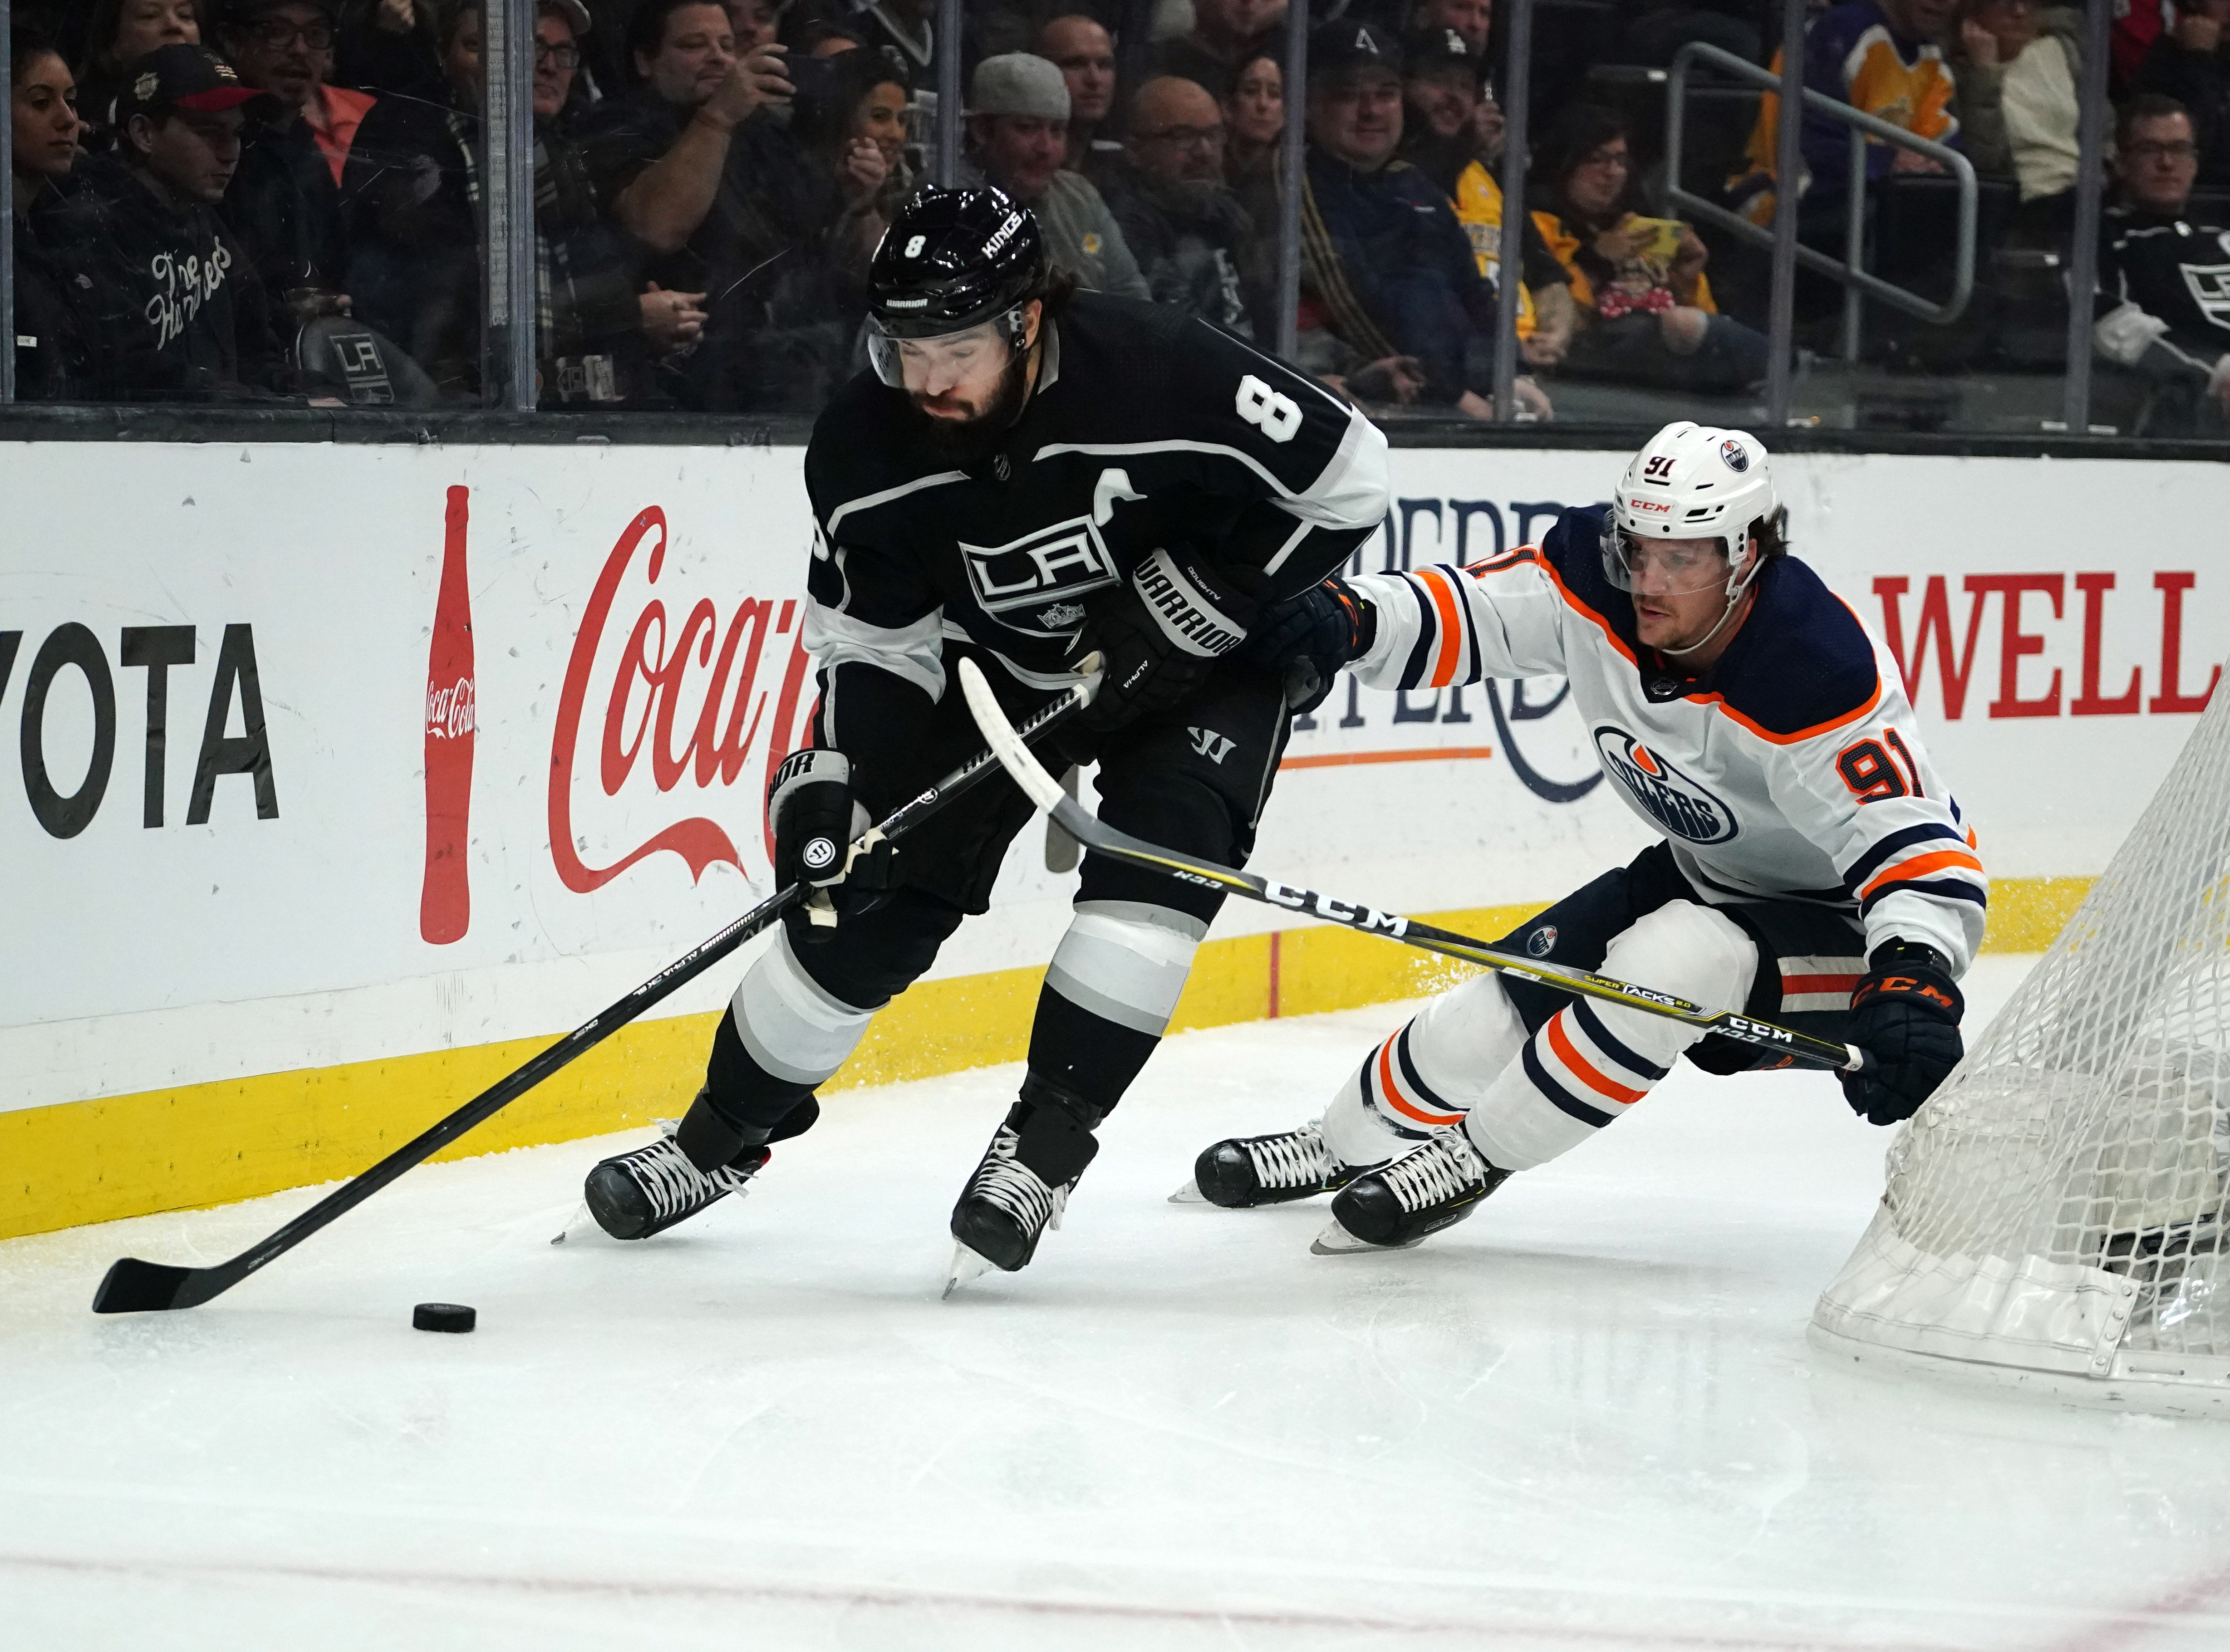 Los Angeles Kings defenseman Drew Doughty is pursued by Edmonton Oilers center Gaetan Haas  in the first period at Staples Center.&nbsp;